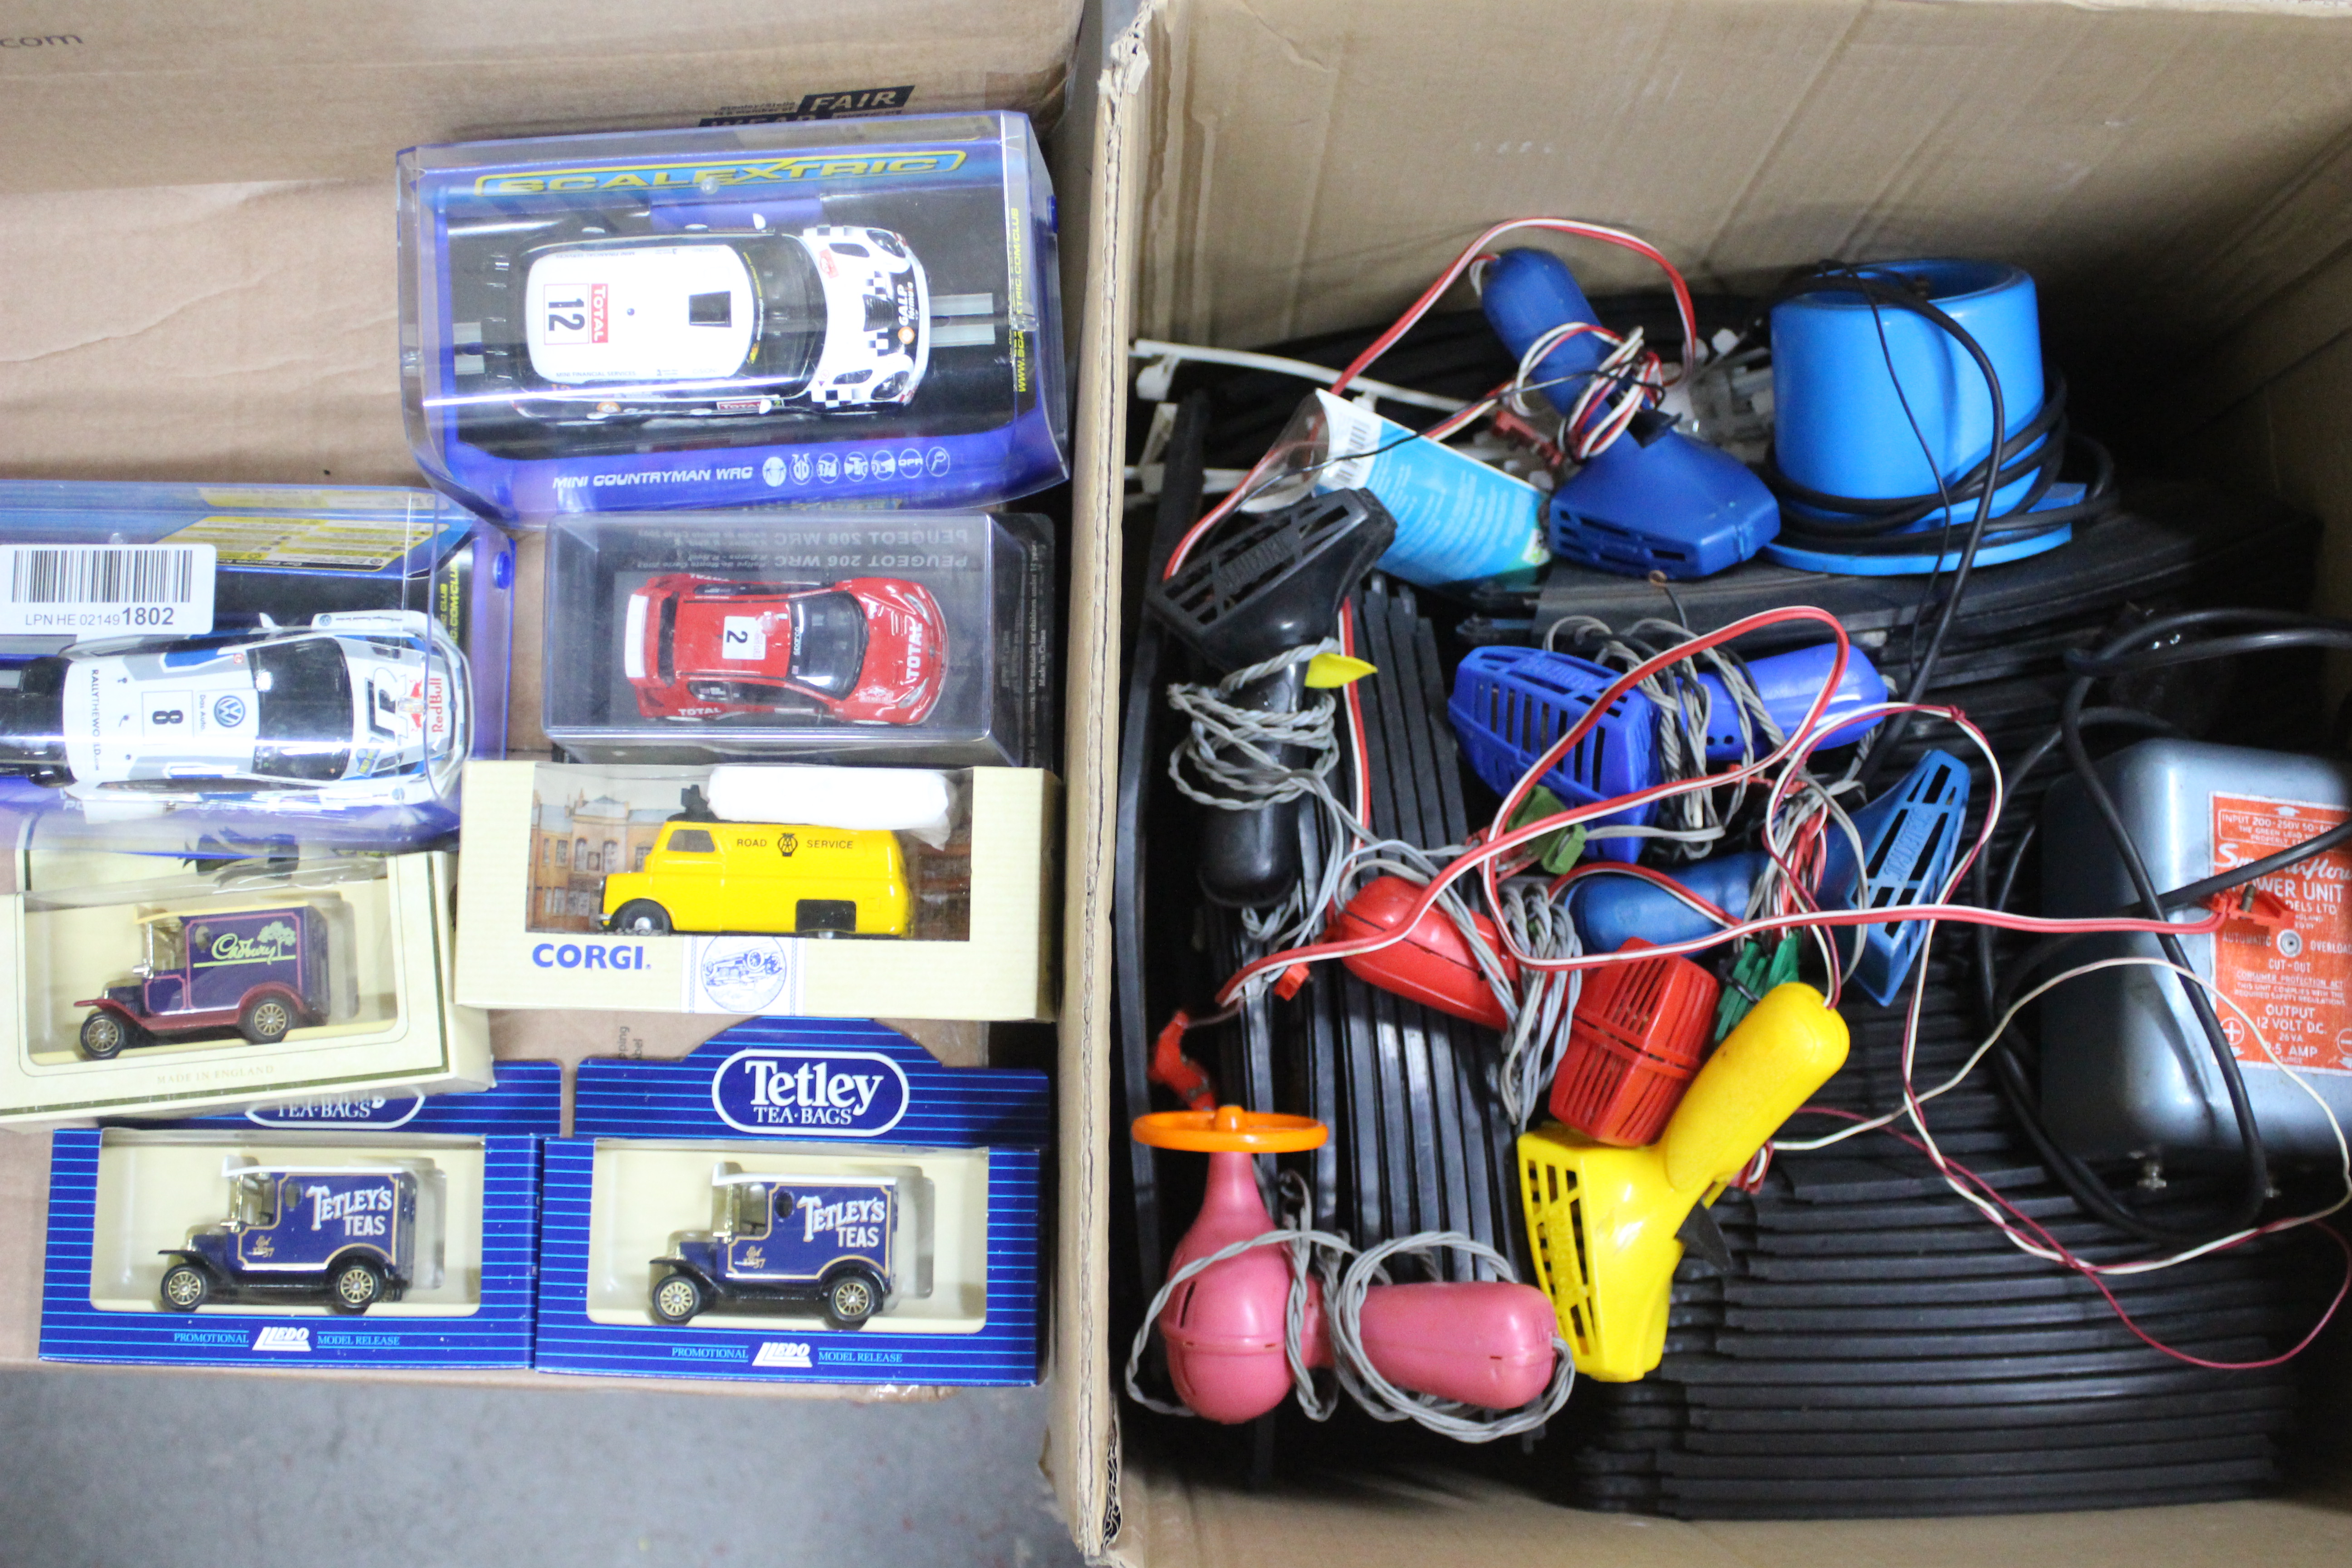 Scalextric - Two boxed Scalextric slot cars with a large quantity of Scalextric track,